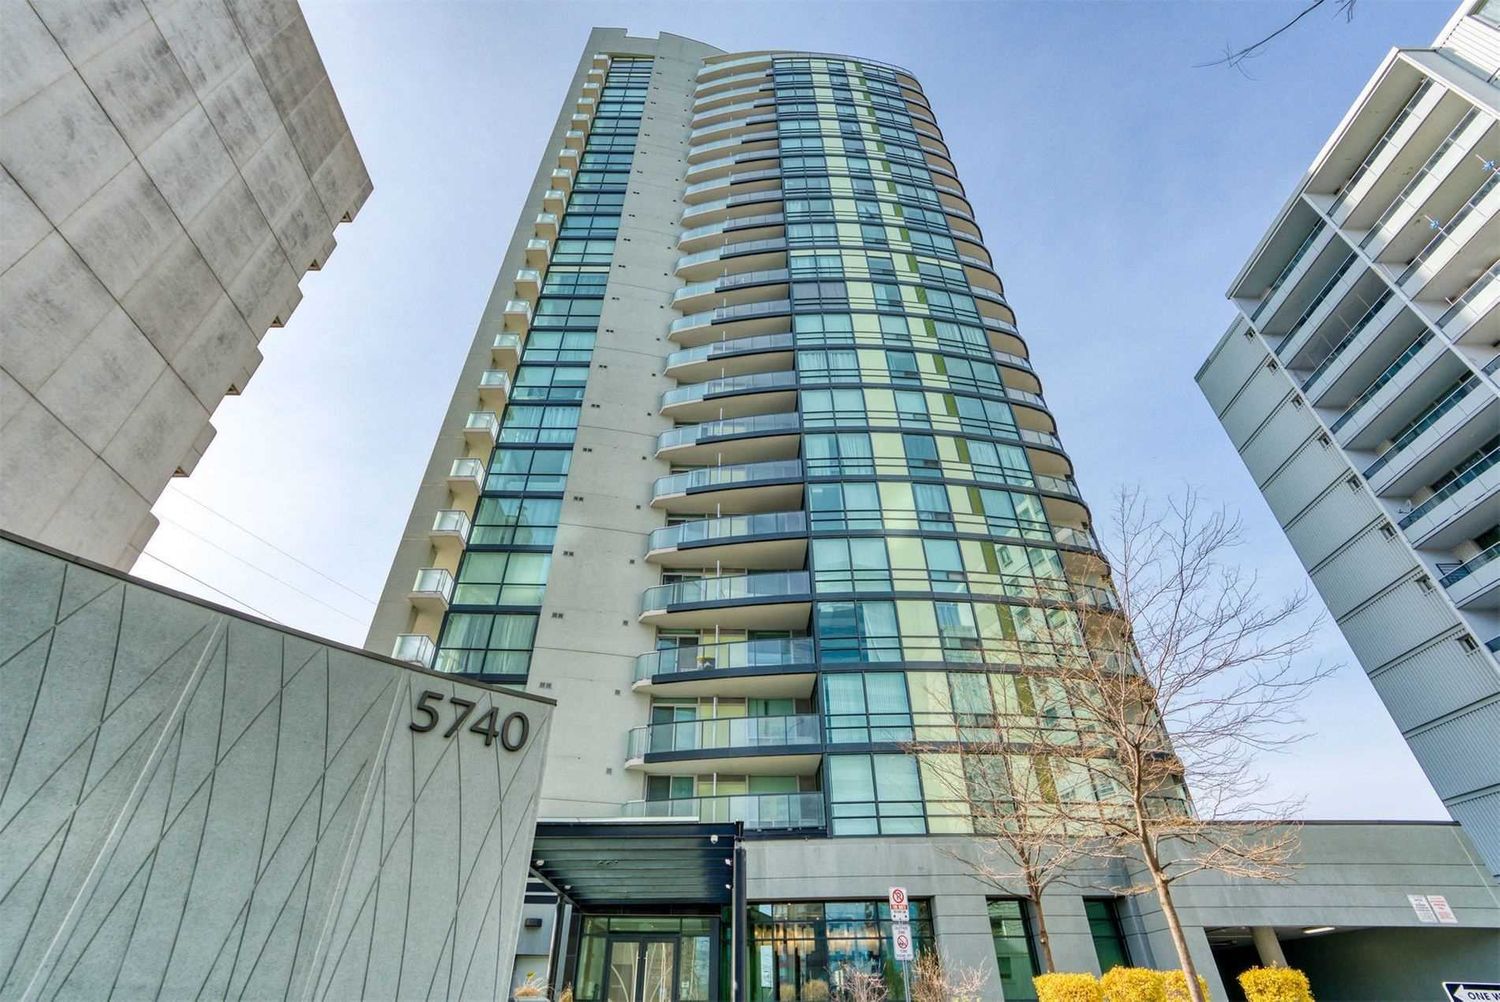 5740 Yonge Street. The Palm Residences is located in  North York, Toronto - image #2 of 2